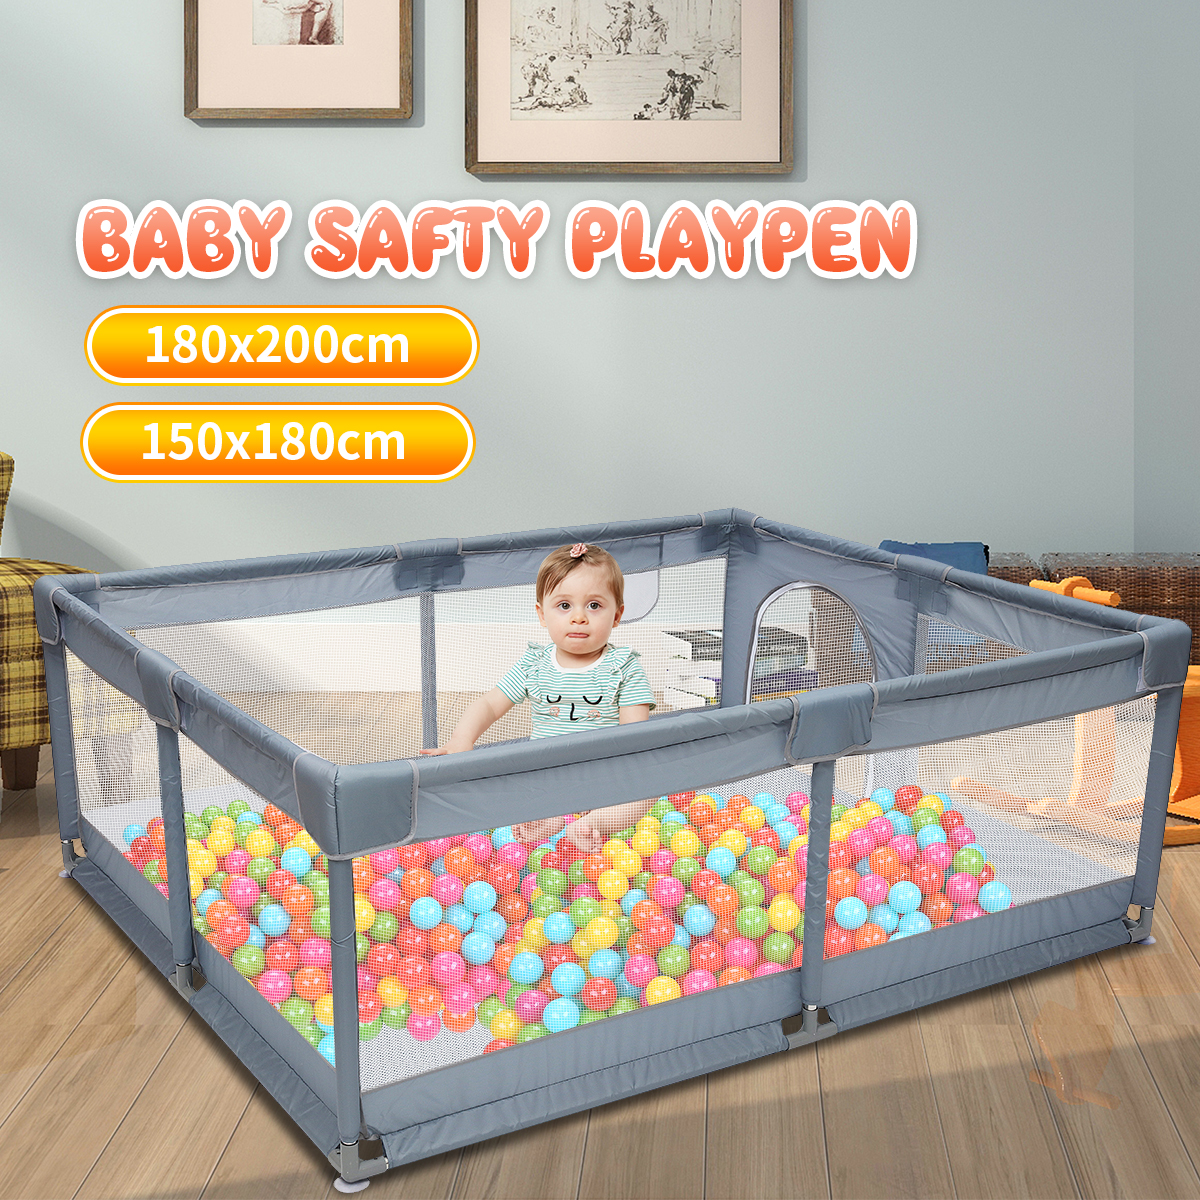 79-Baby-Playpen-Infants-Toddler-Safety-Kids-Packable--Portable-Play-Pens-Activity-Play-Yard-Gate-for-1935215-10